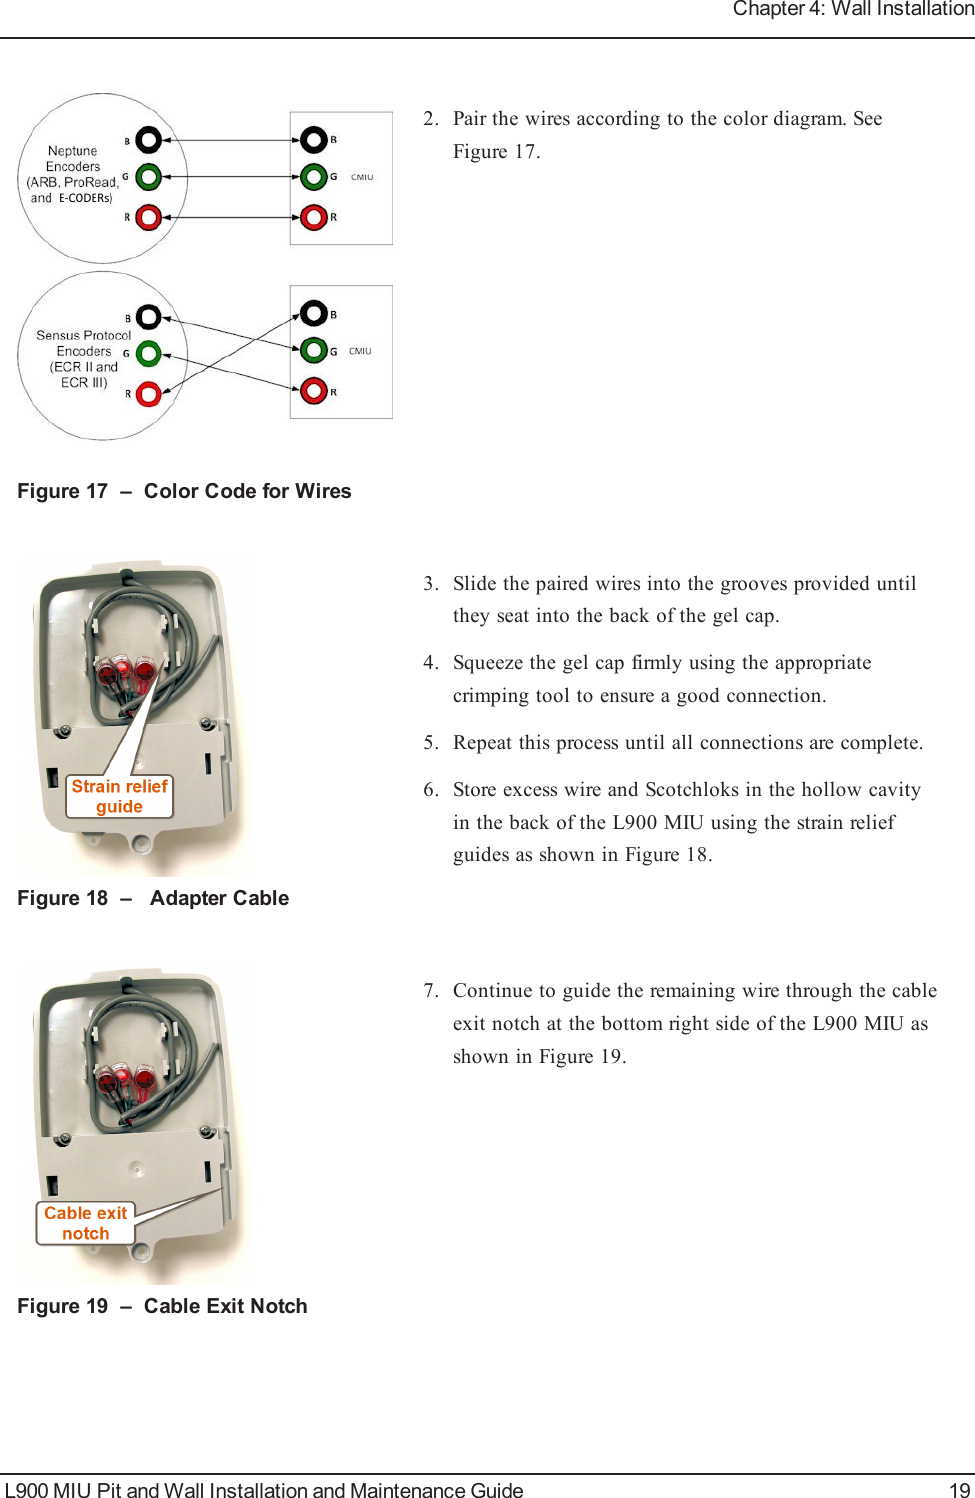 Figure 17 – Color Code for Wires2. Pair the wires according to the color diagram. SeeFigure 17.Figure 18 – Adapter Cable3. Slide the paired wires into the grooves provided untilthey seat into the back of the gel cap.4. Squeeze the gel cap firmly using the appropriatecrimping tool to ensure a good connection.5. Repeat this process until all connections are complete.6. Store excess wire and Scotchloks in the hollow cavityin the back of the L900 MIU using the strain reliefguides as shown in Figure 18.Figure 19 – Cable Exit Notch7. Continue to guide the remaining wire through the cableexit notch at the bottom right side of the L900 MIU asshown in Figure 19.L900 MIU Pit and Wall Installation and Maintenance Guide 19Chapter 4: Wall Installation